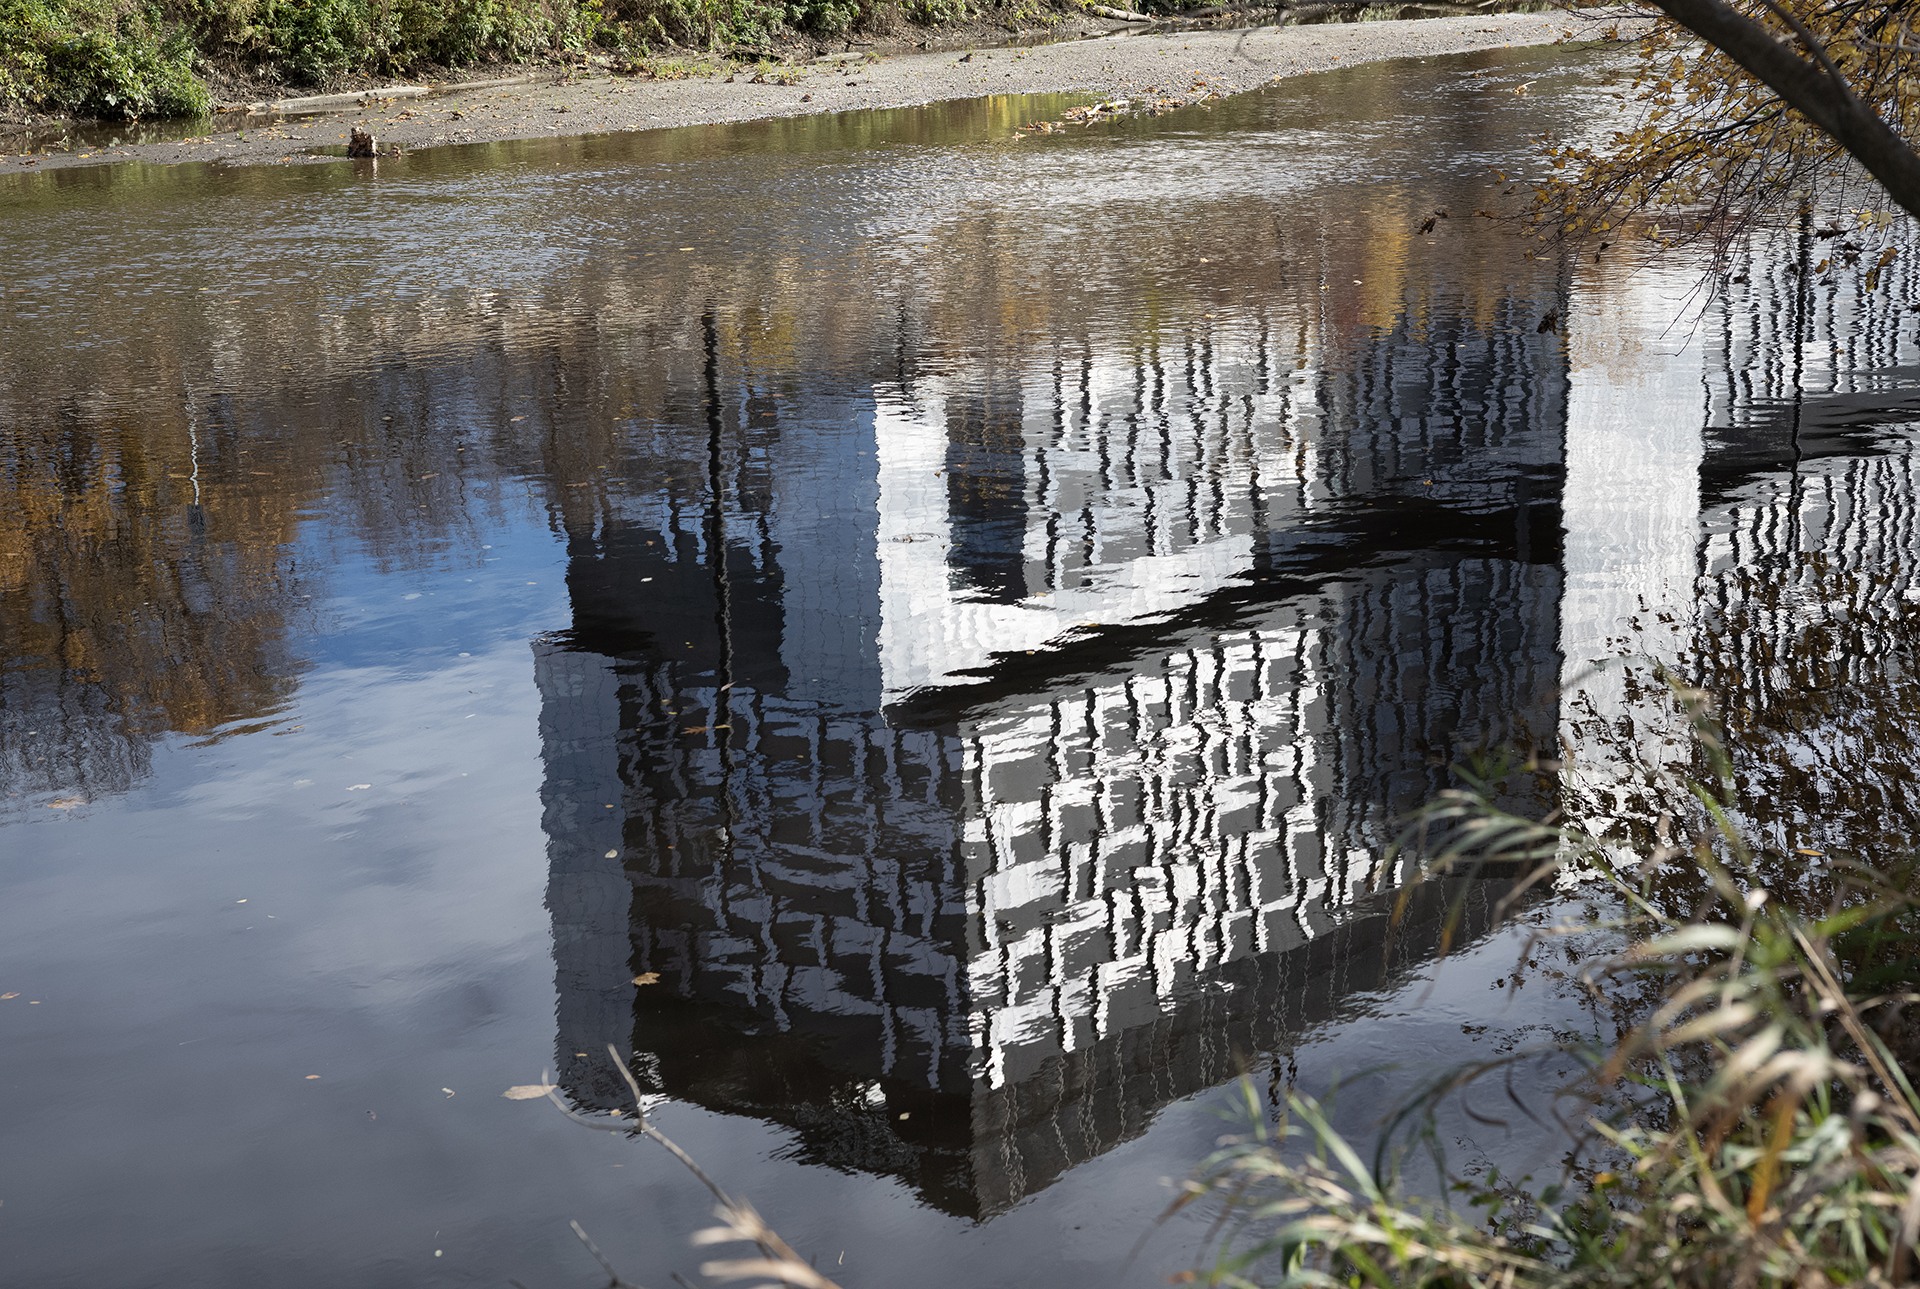 Don River: A water reflection of a modern building on the river with ripples. Plants and trees are also visible on the edges.